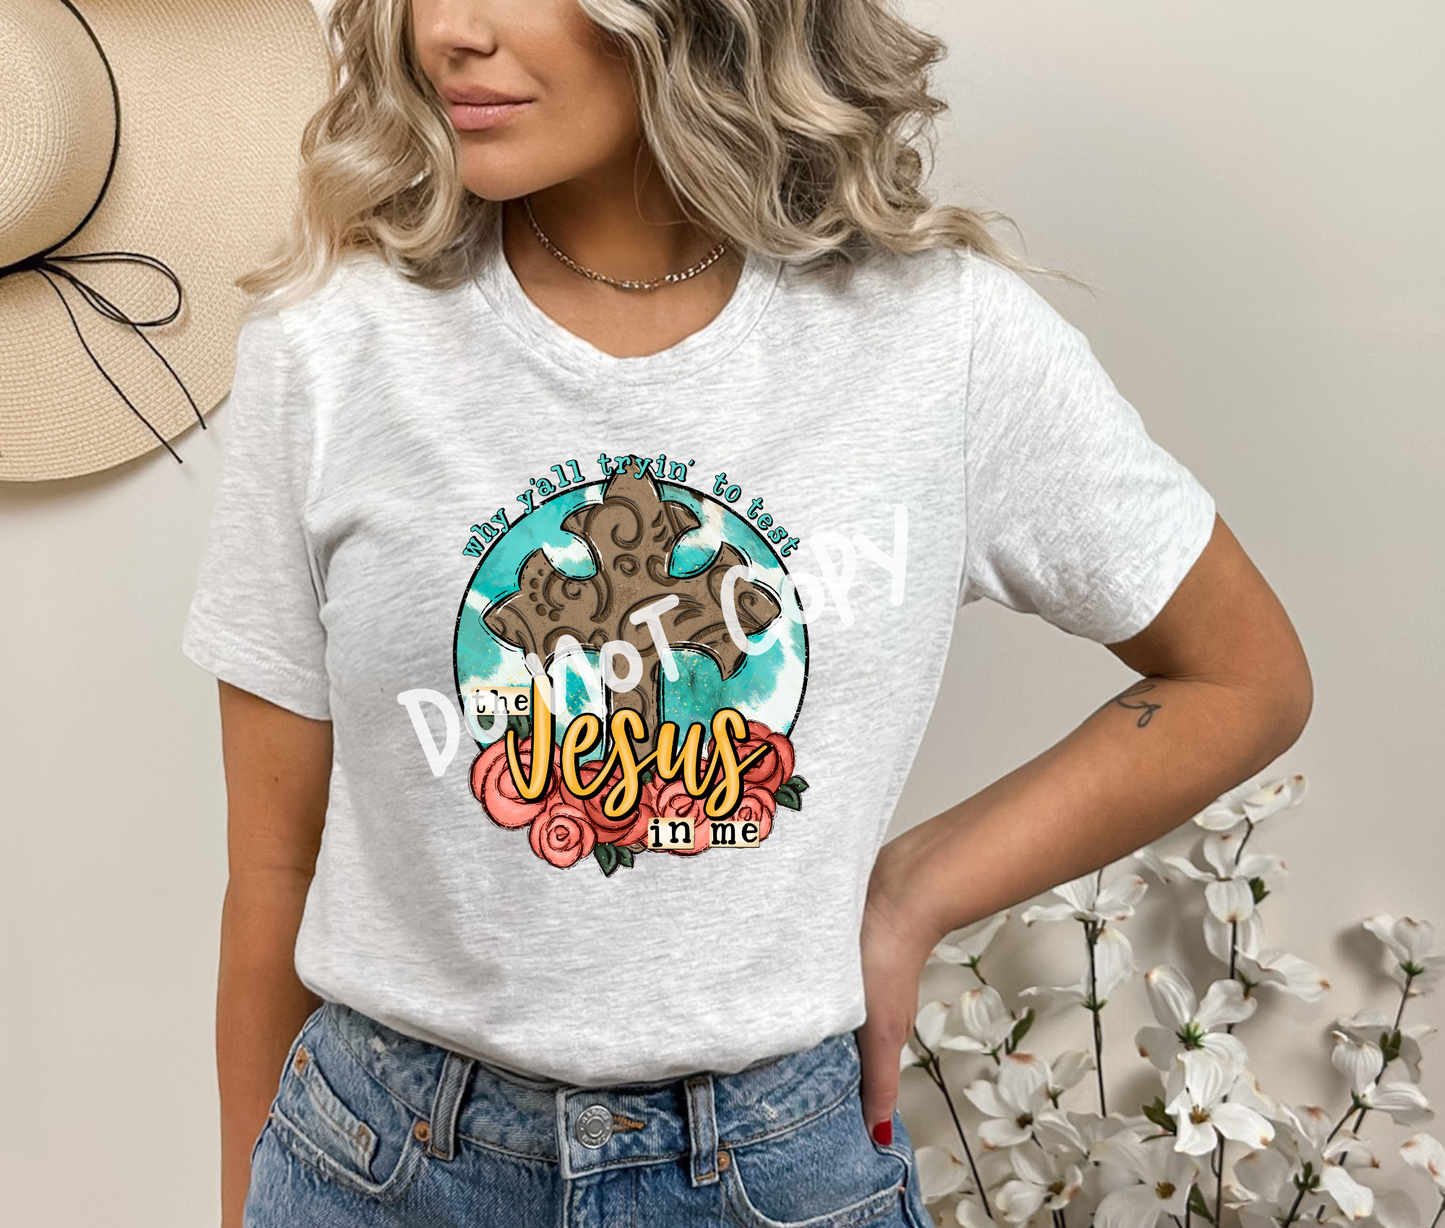 Why Ya'll Trying to Test The Jesus In Me Tee